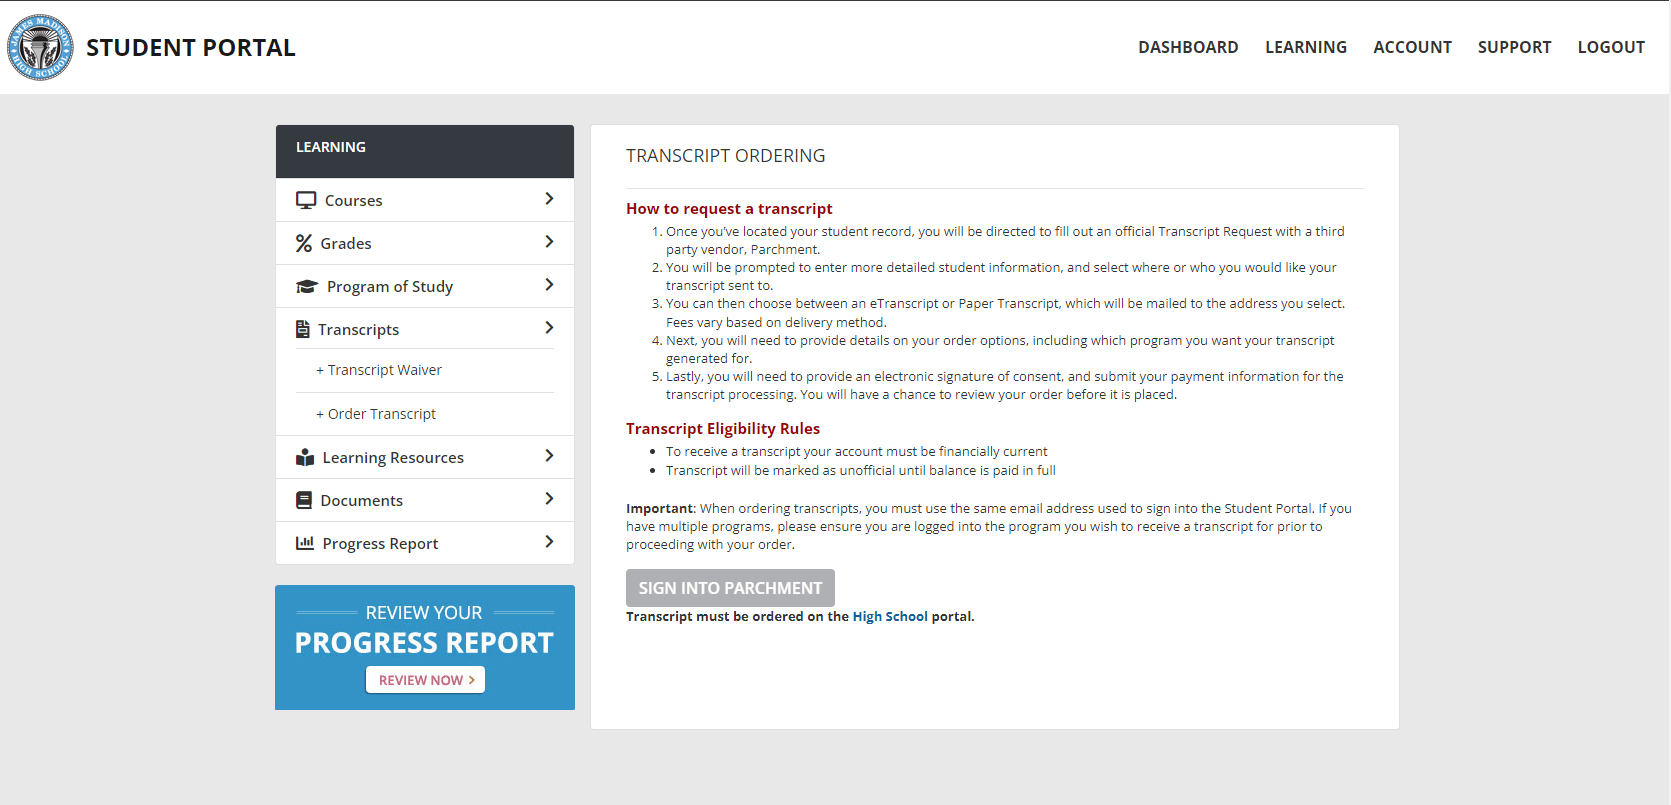 Image of the transcript section on the Student portal that provides details on how to order a transcript, transcript eligibility rules, and a link to where you can order a transcript.